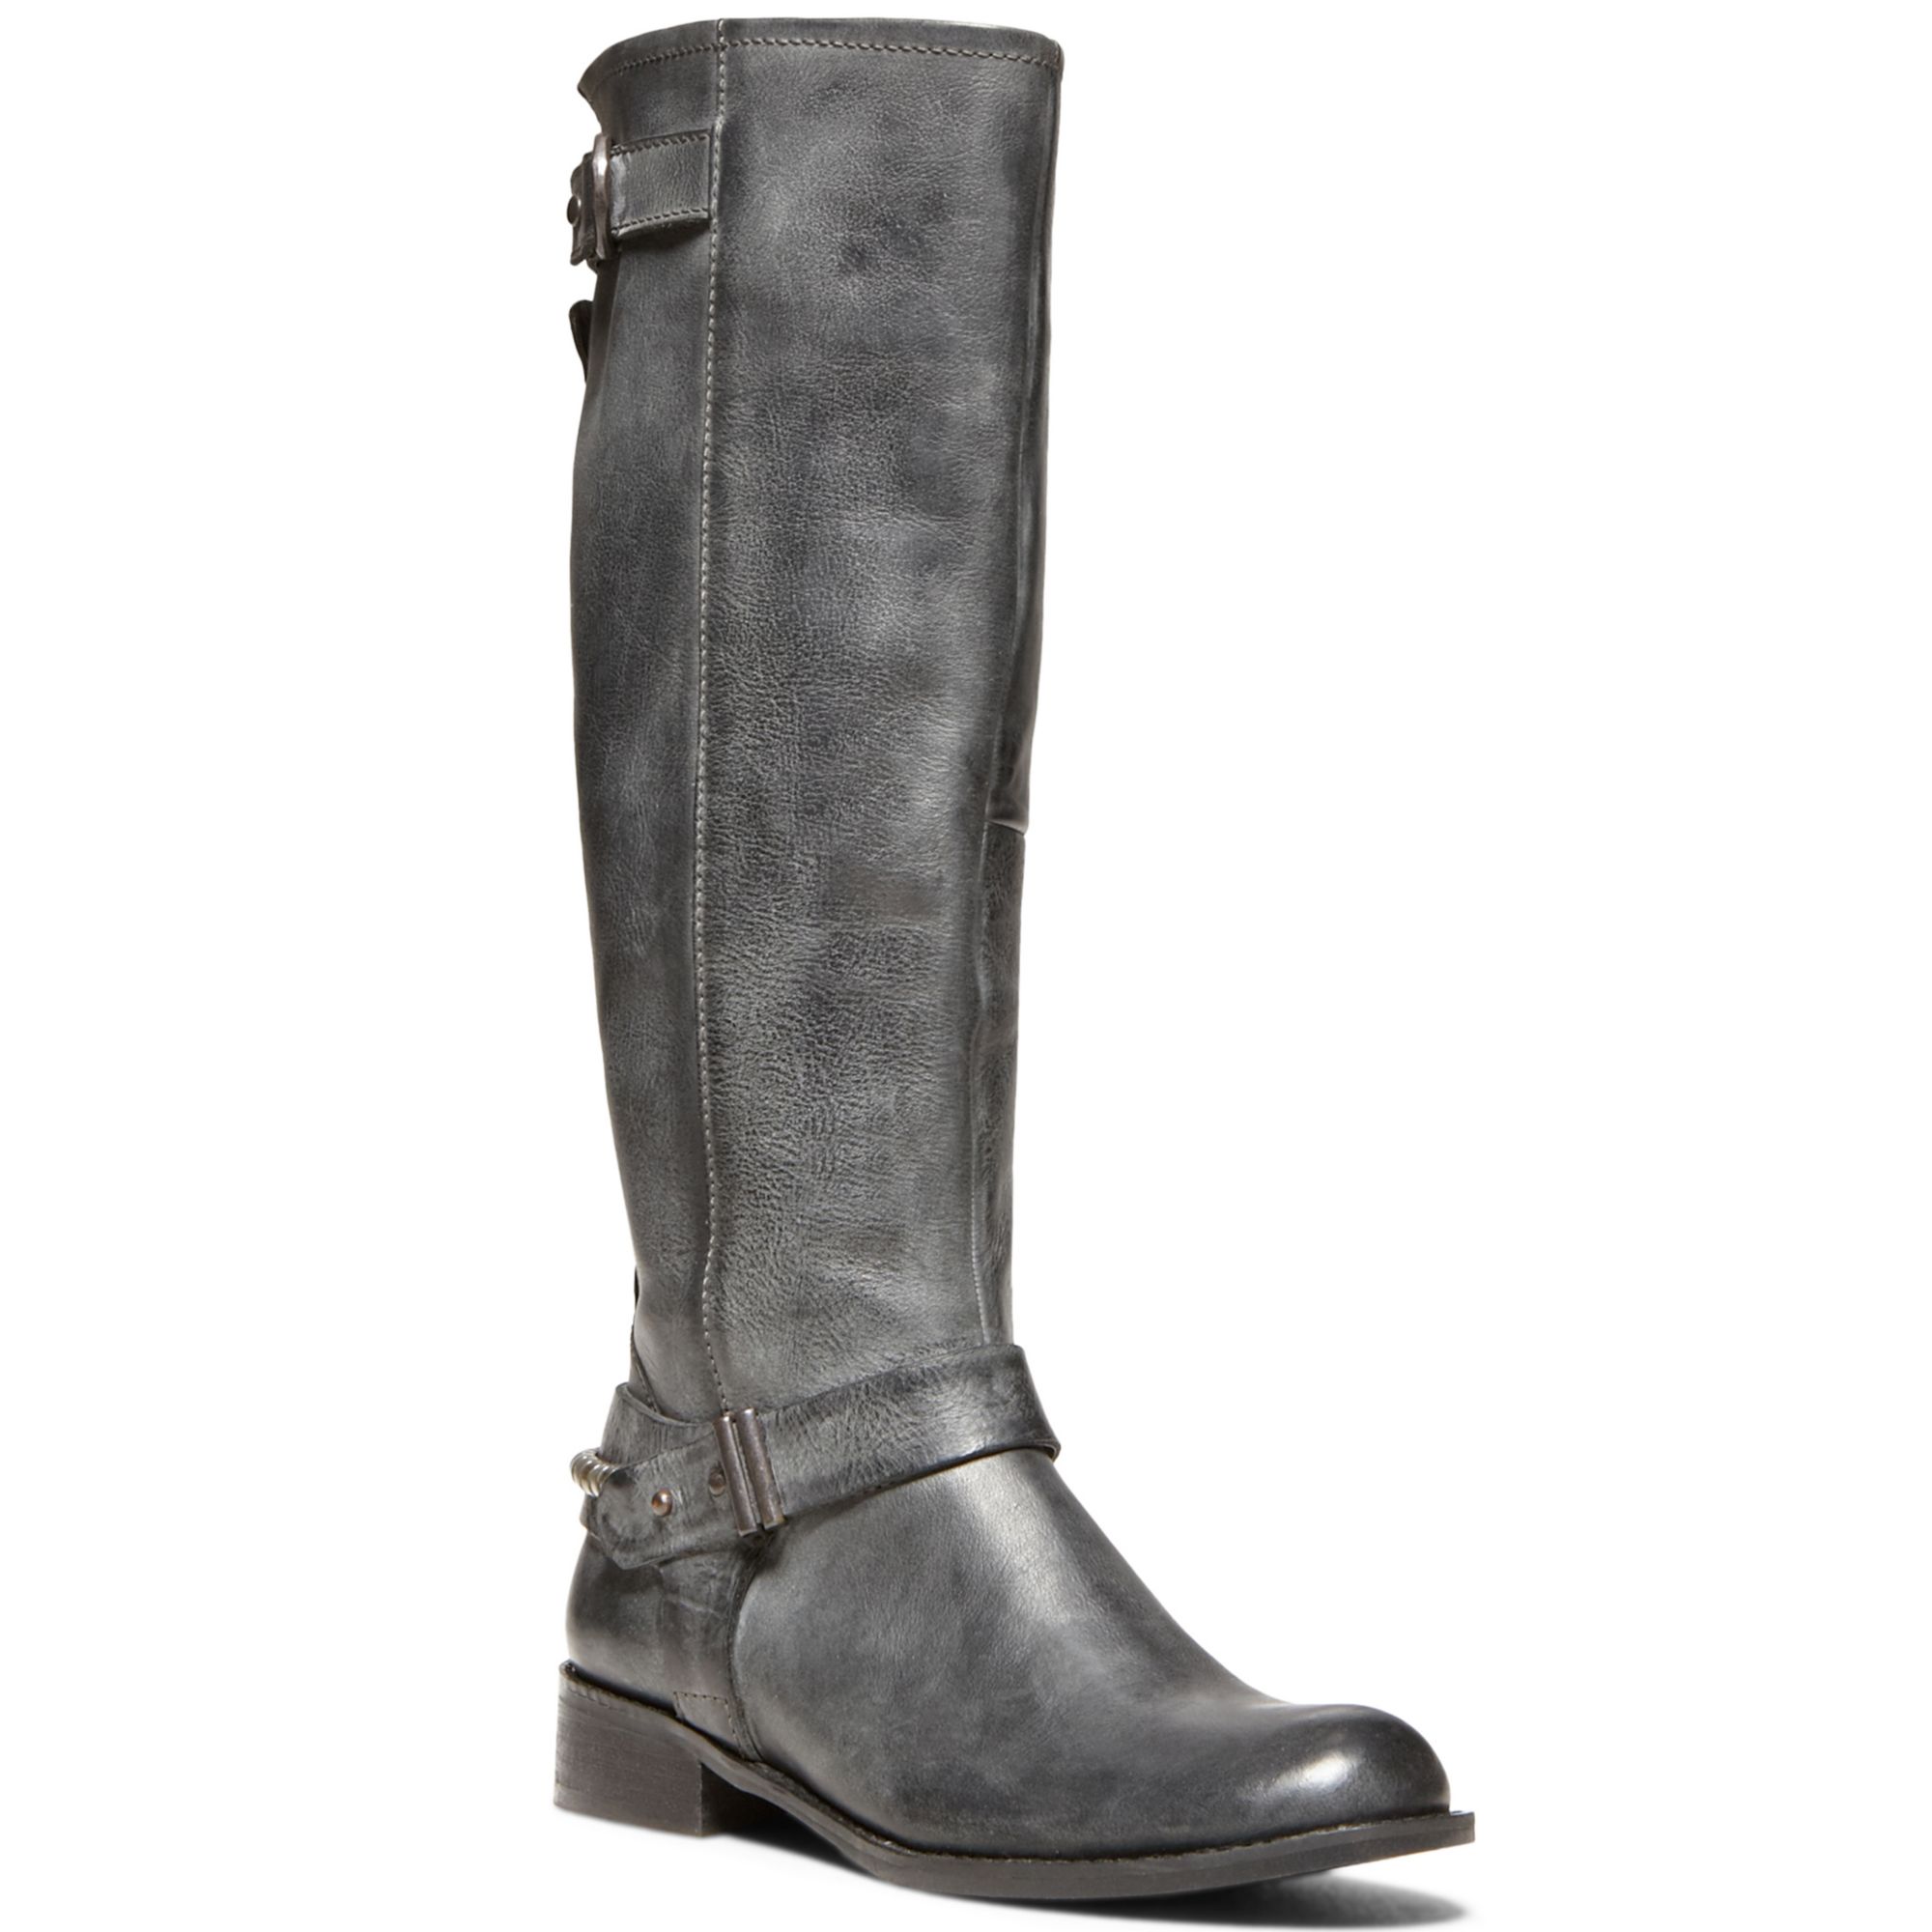 Lyst - Steven by steve madden Ryley Riding Boots in Black